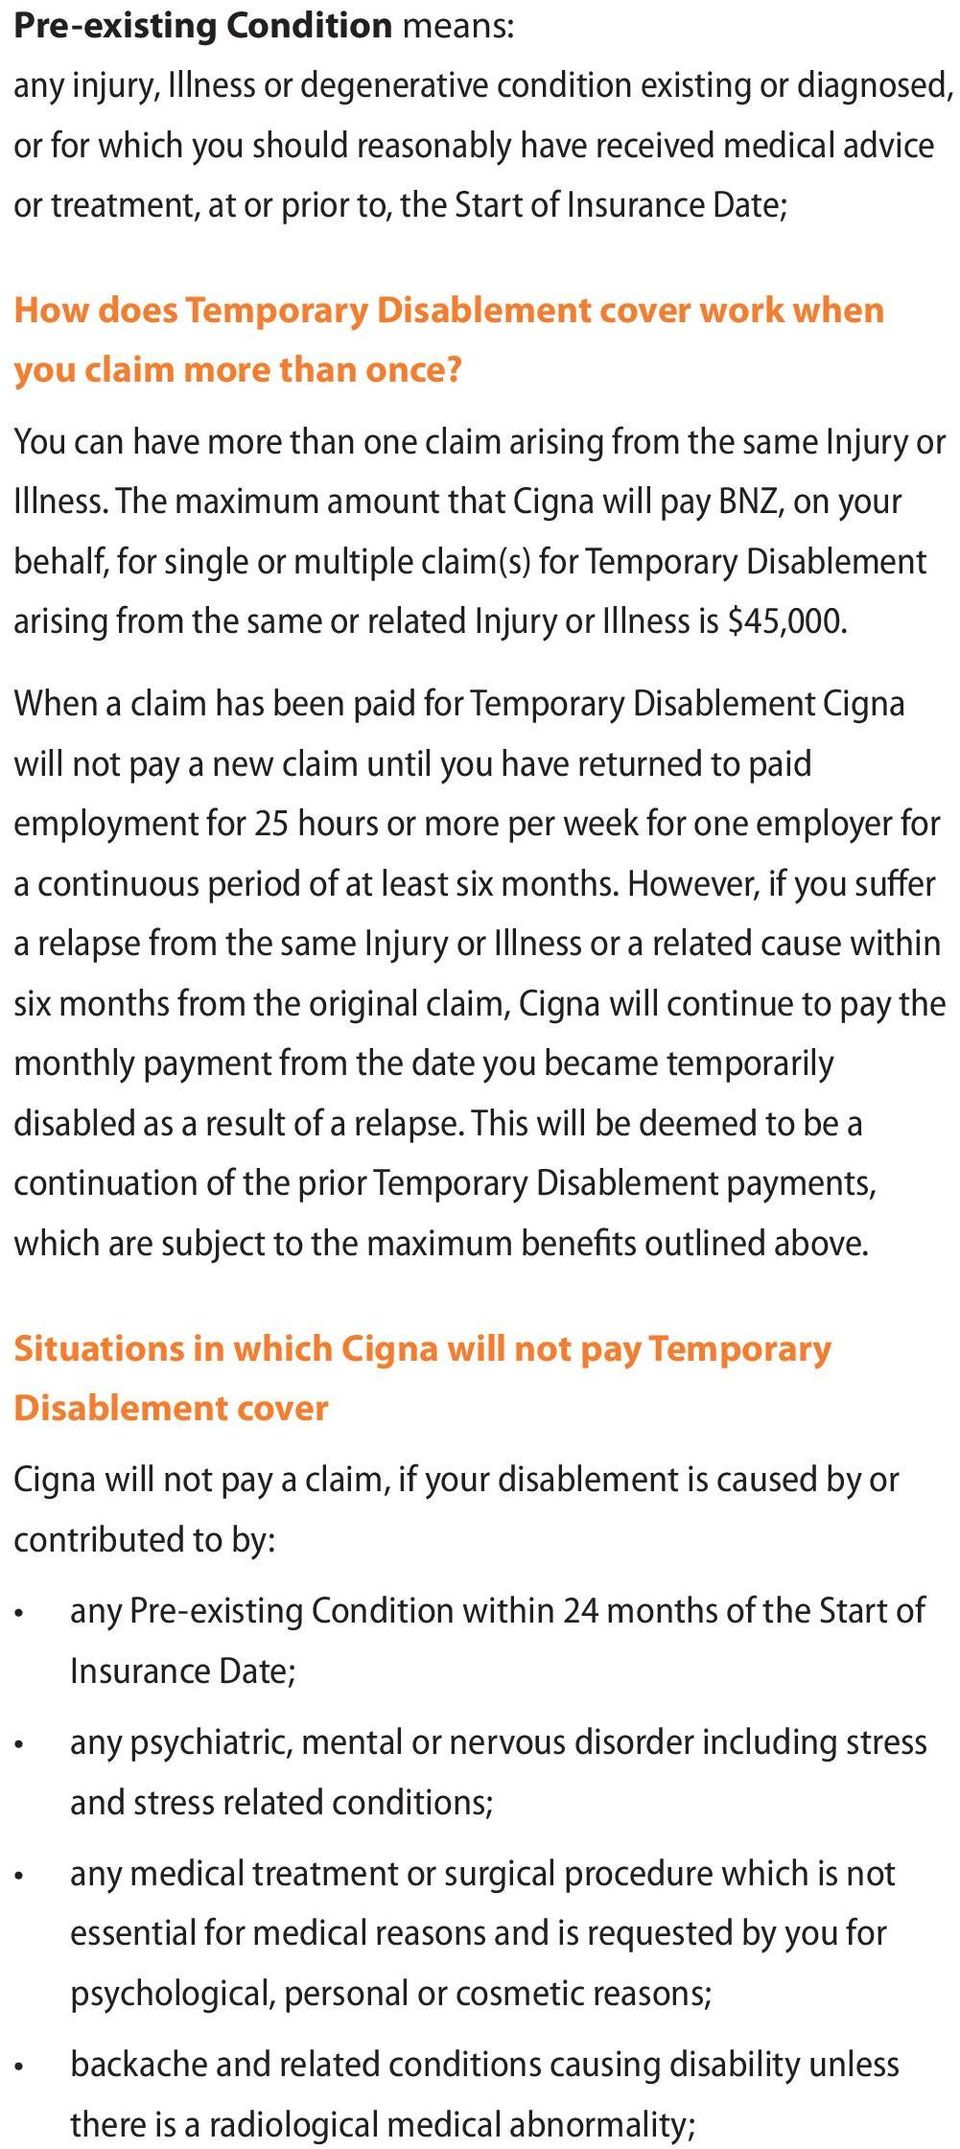 The maximum amount that Cigna will pay BNZ, on your behalf, for single or multiple claim(s) for Temporary Disablement arising from the same or related Injury or Illness is $45,000.